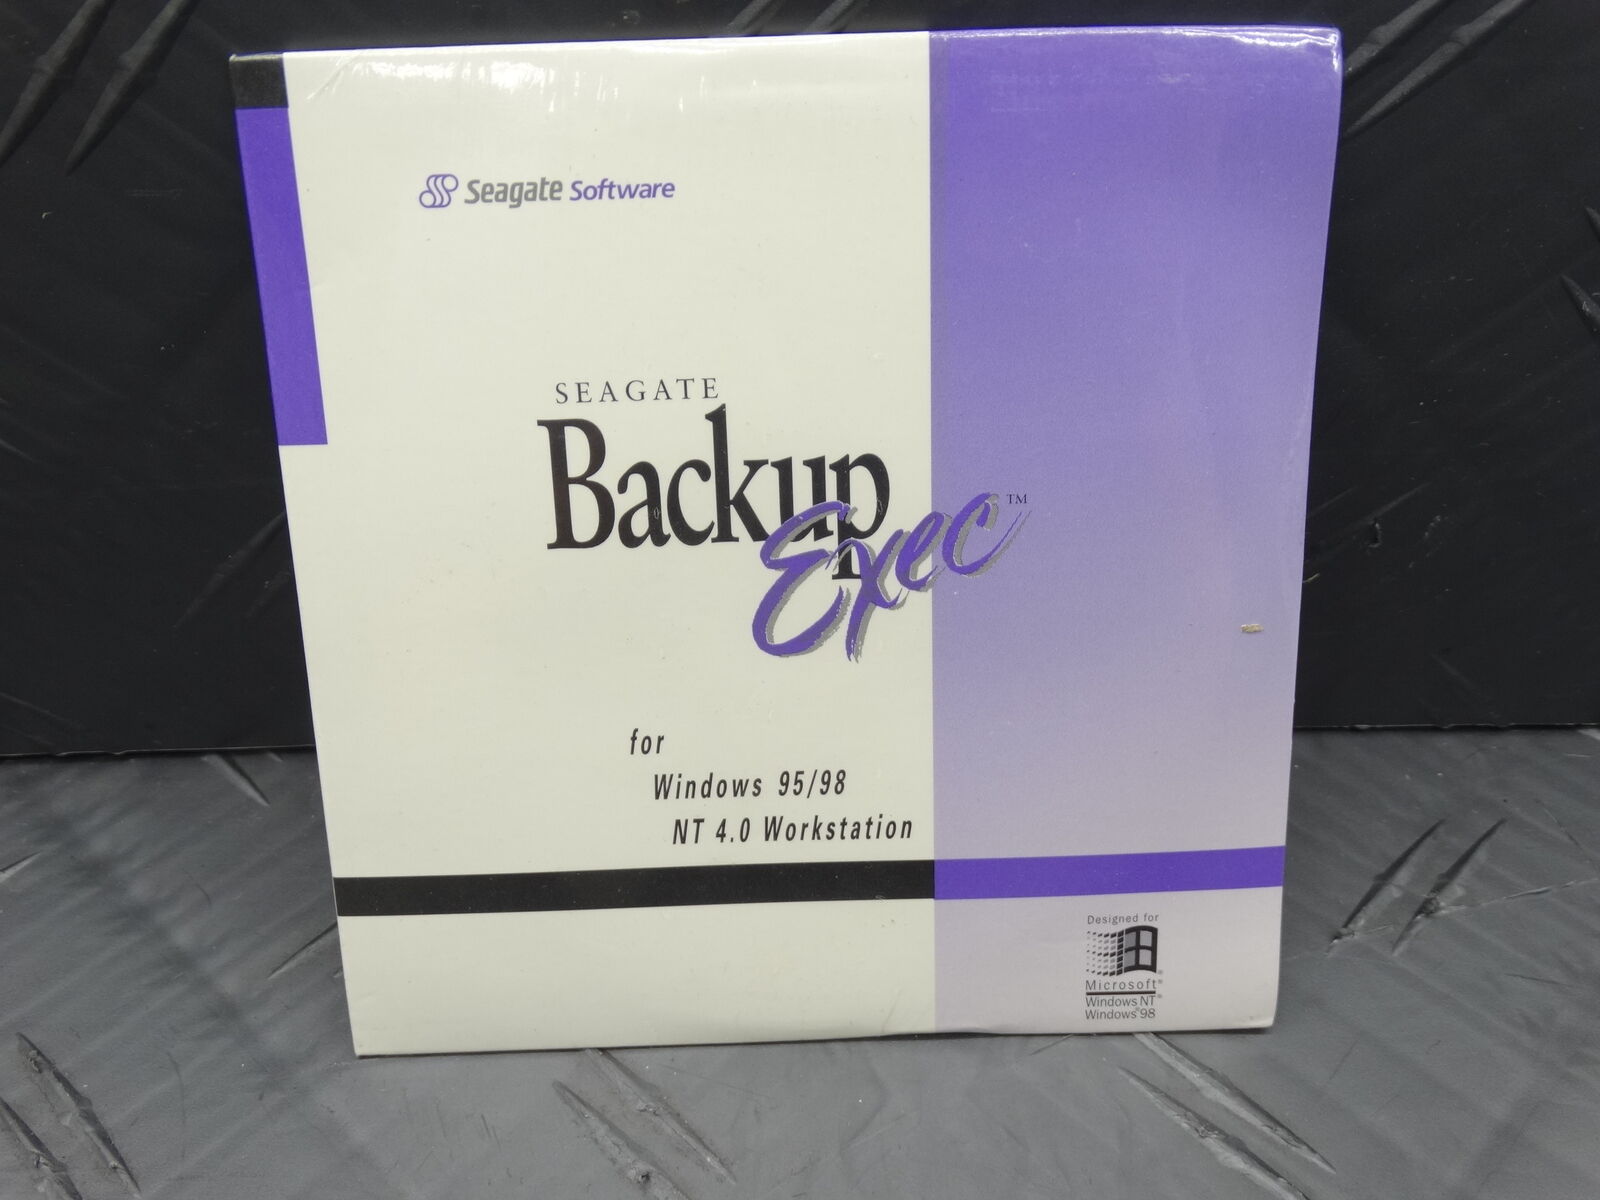 Seagate Backup Exec Software for Windows 95/98 NT 4.0 CD